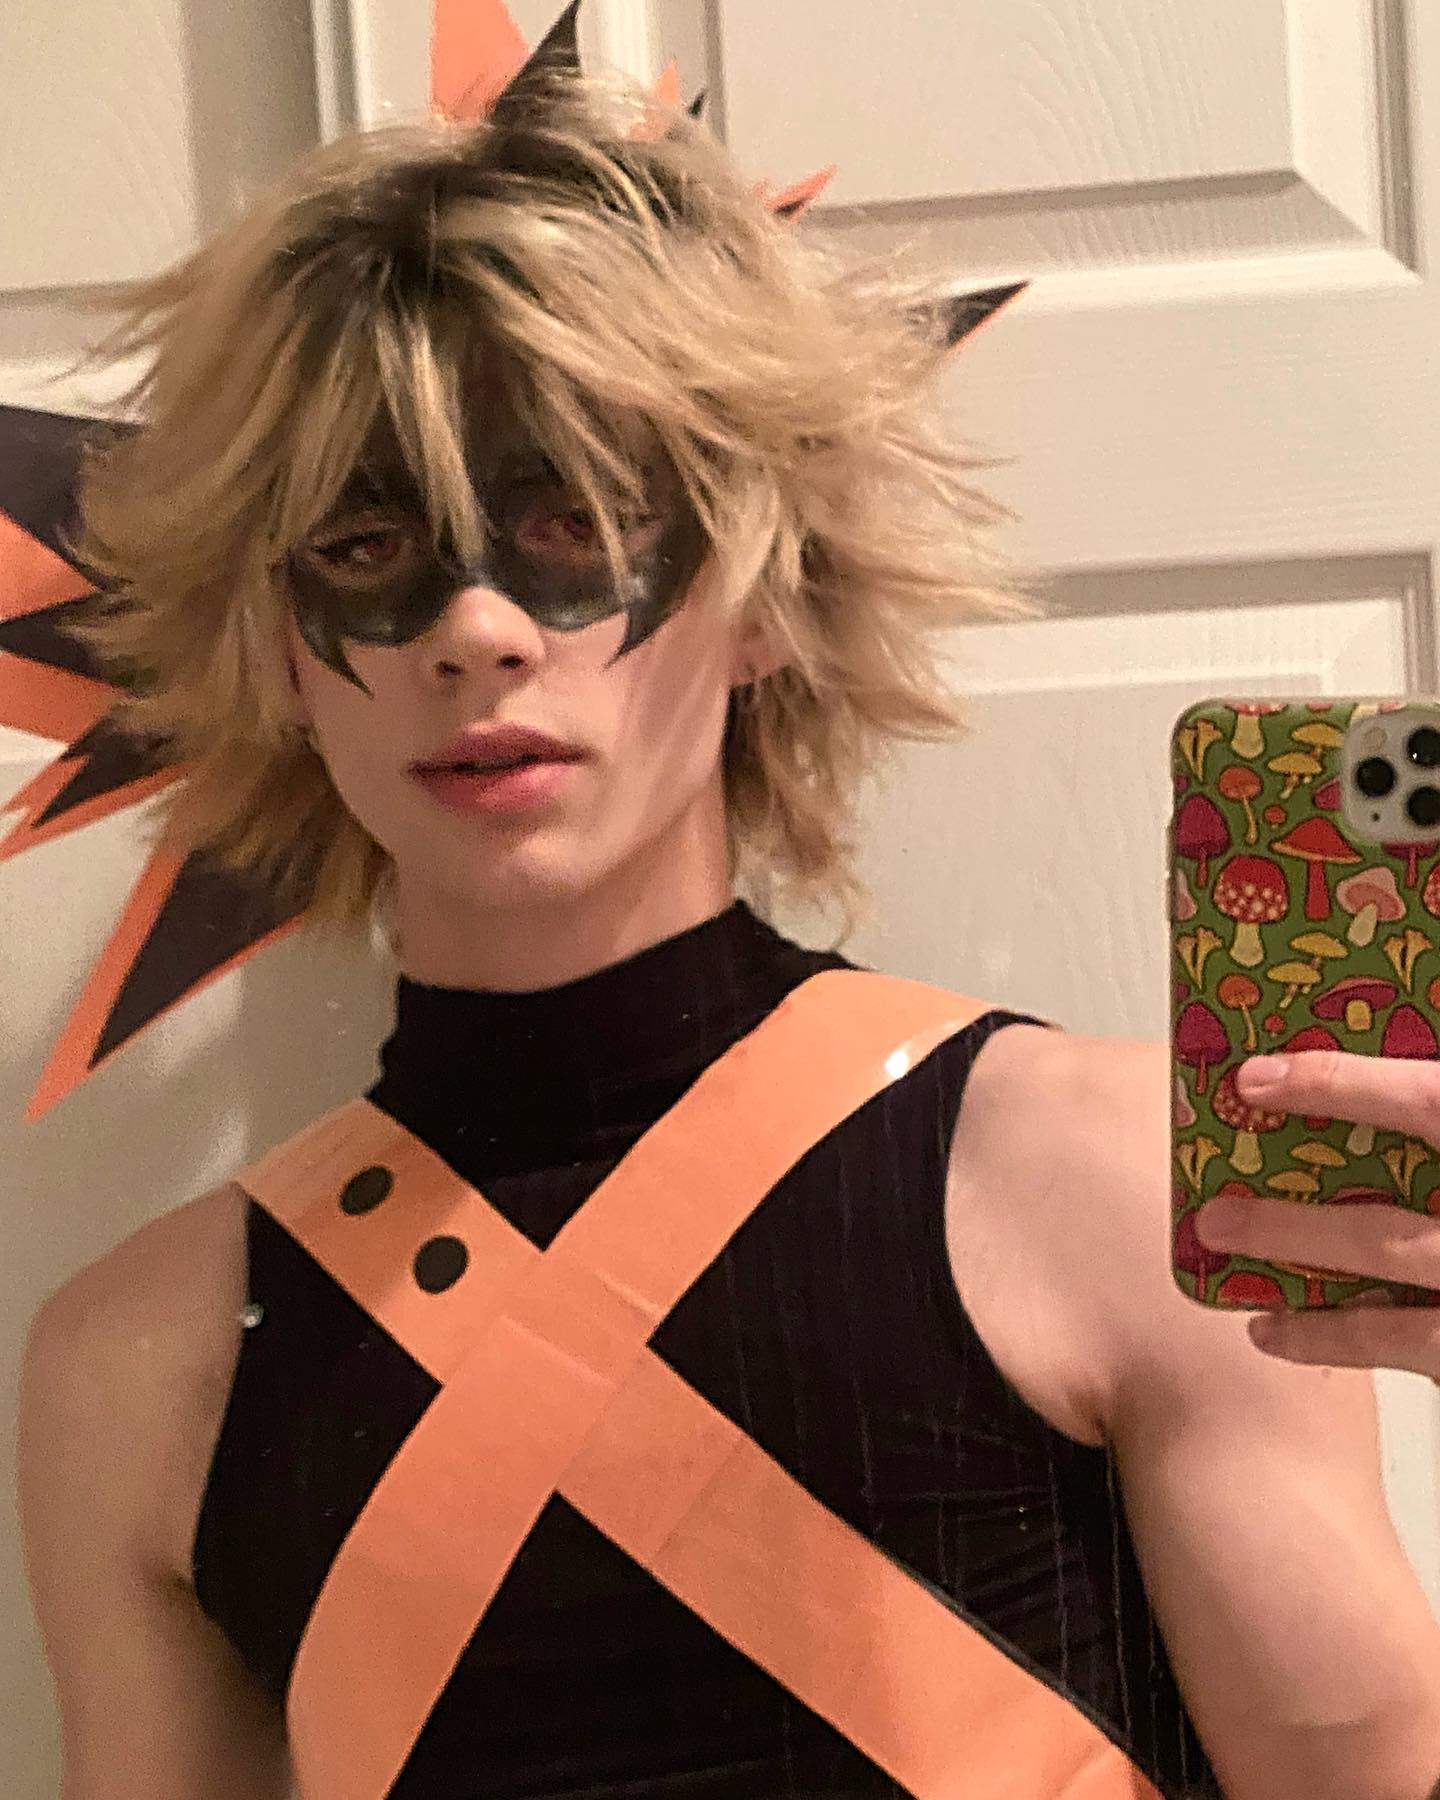 had to cosplay bakudead before the blonde goes